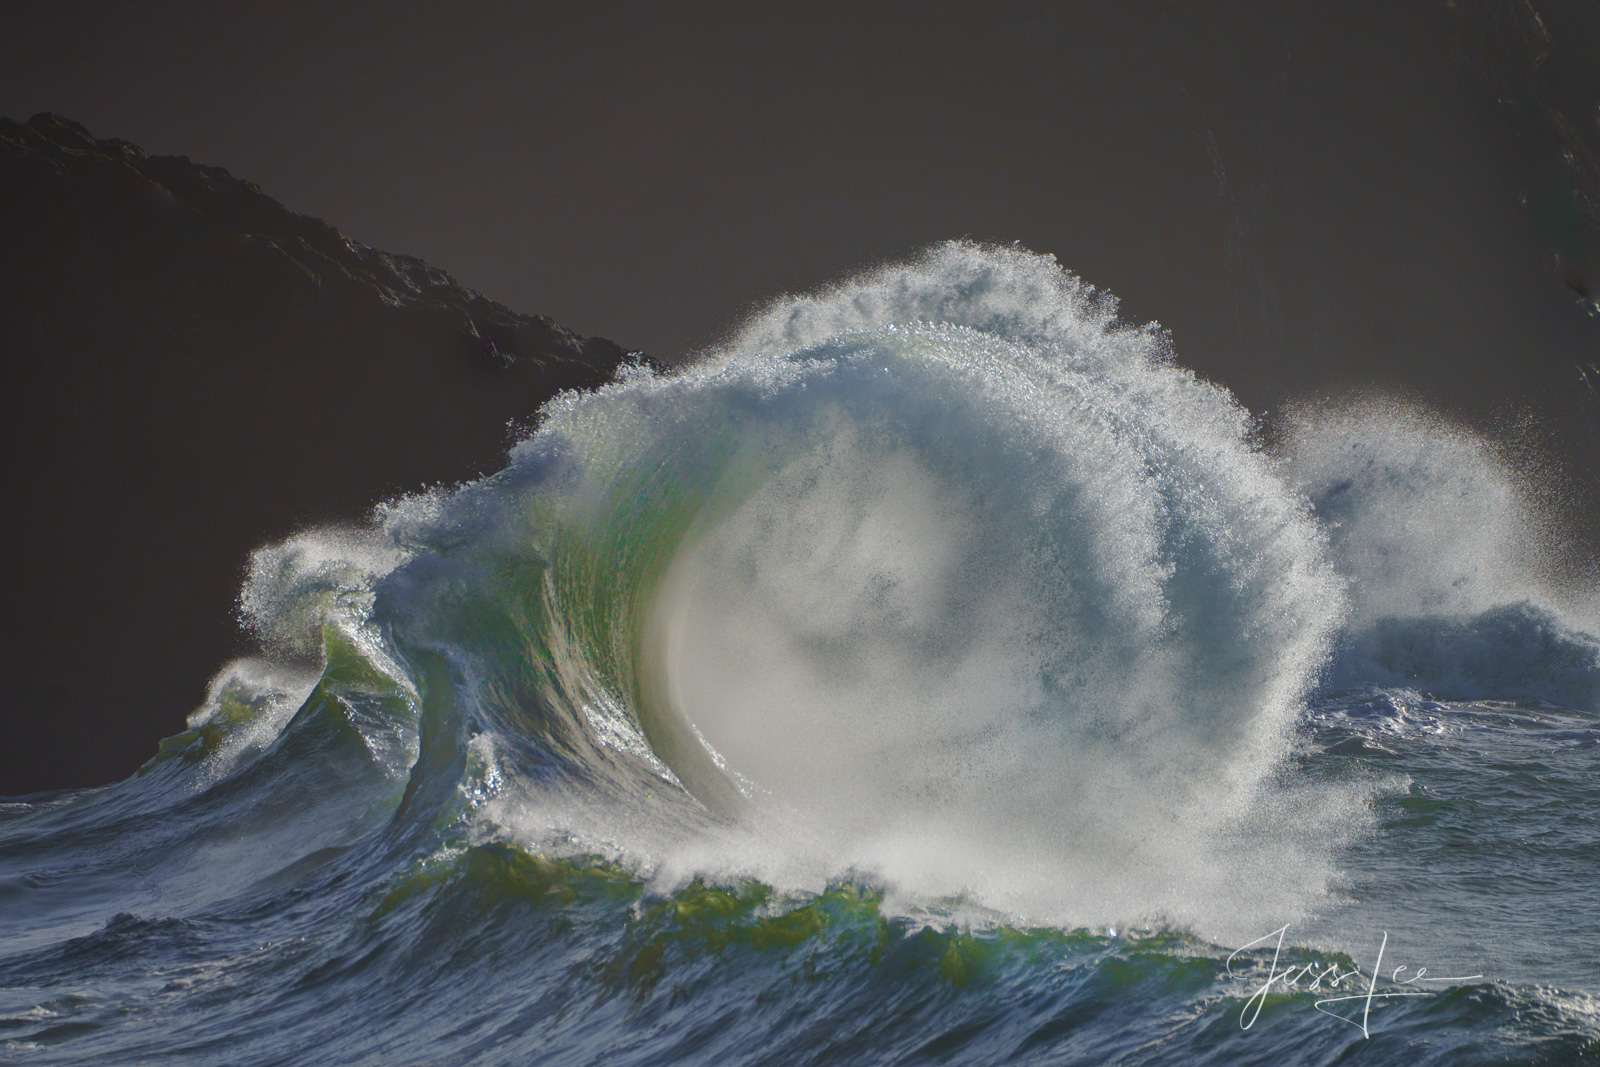 Reverse Twisted Wave Seascape Surf Photos from a Fine Art Limited Edition Gallery  of 100 prints.